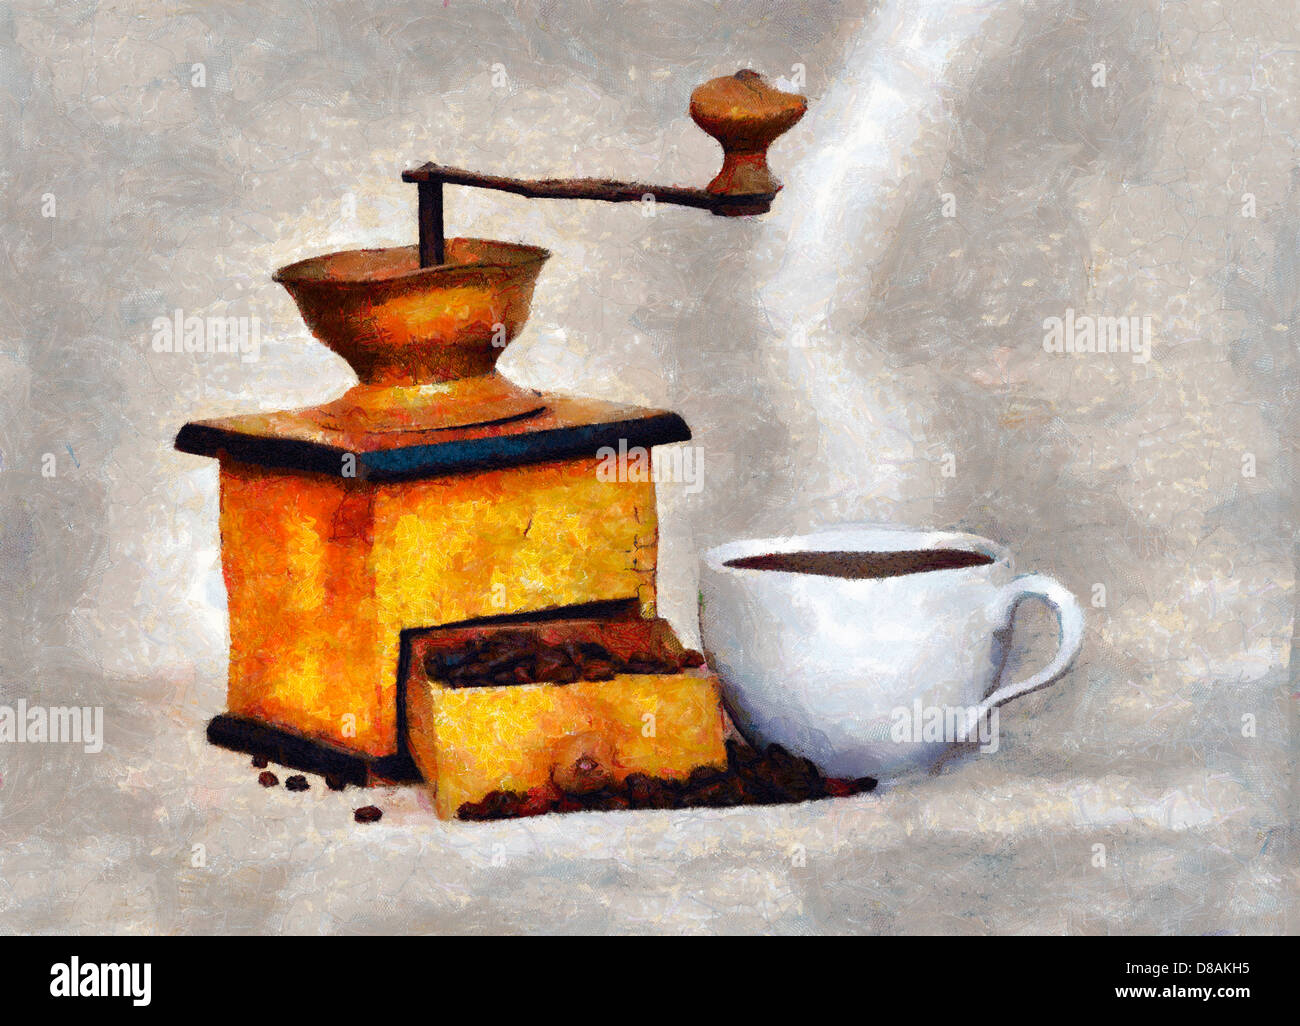 Antique coffee grinder with coffee beans an cup of hot black coffee Stock Photo